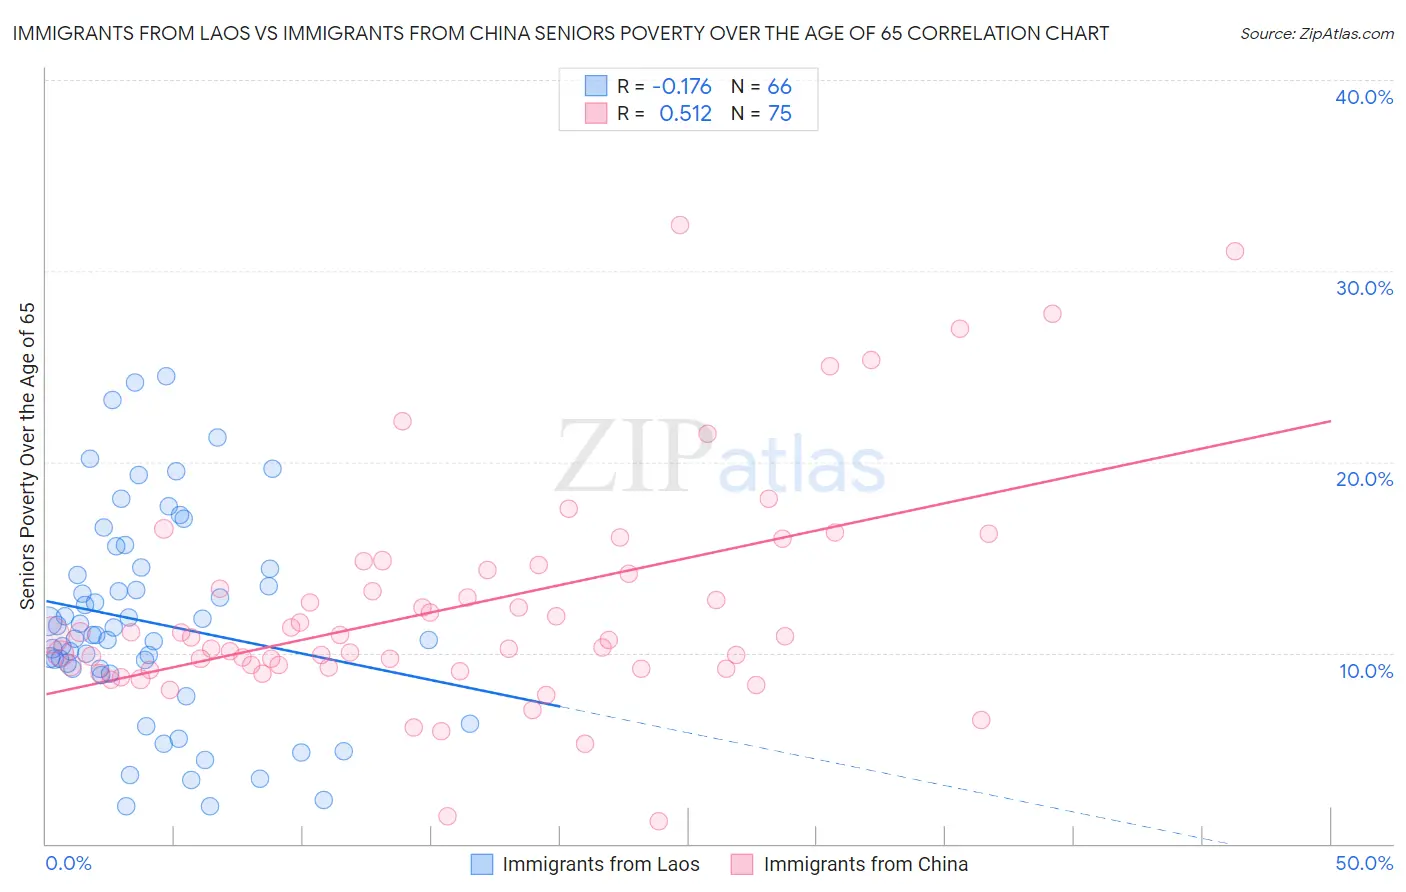 Immigrants from Laos vs Immigrants from China Seniors Poverty Over the Age of 65